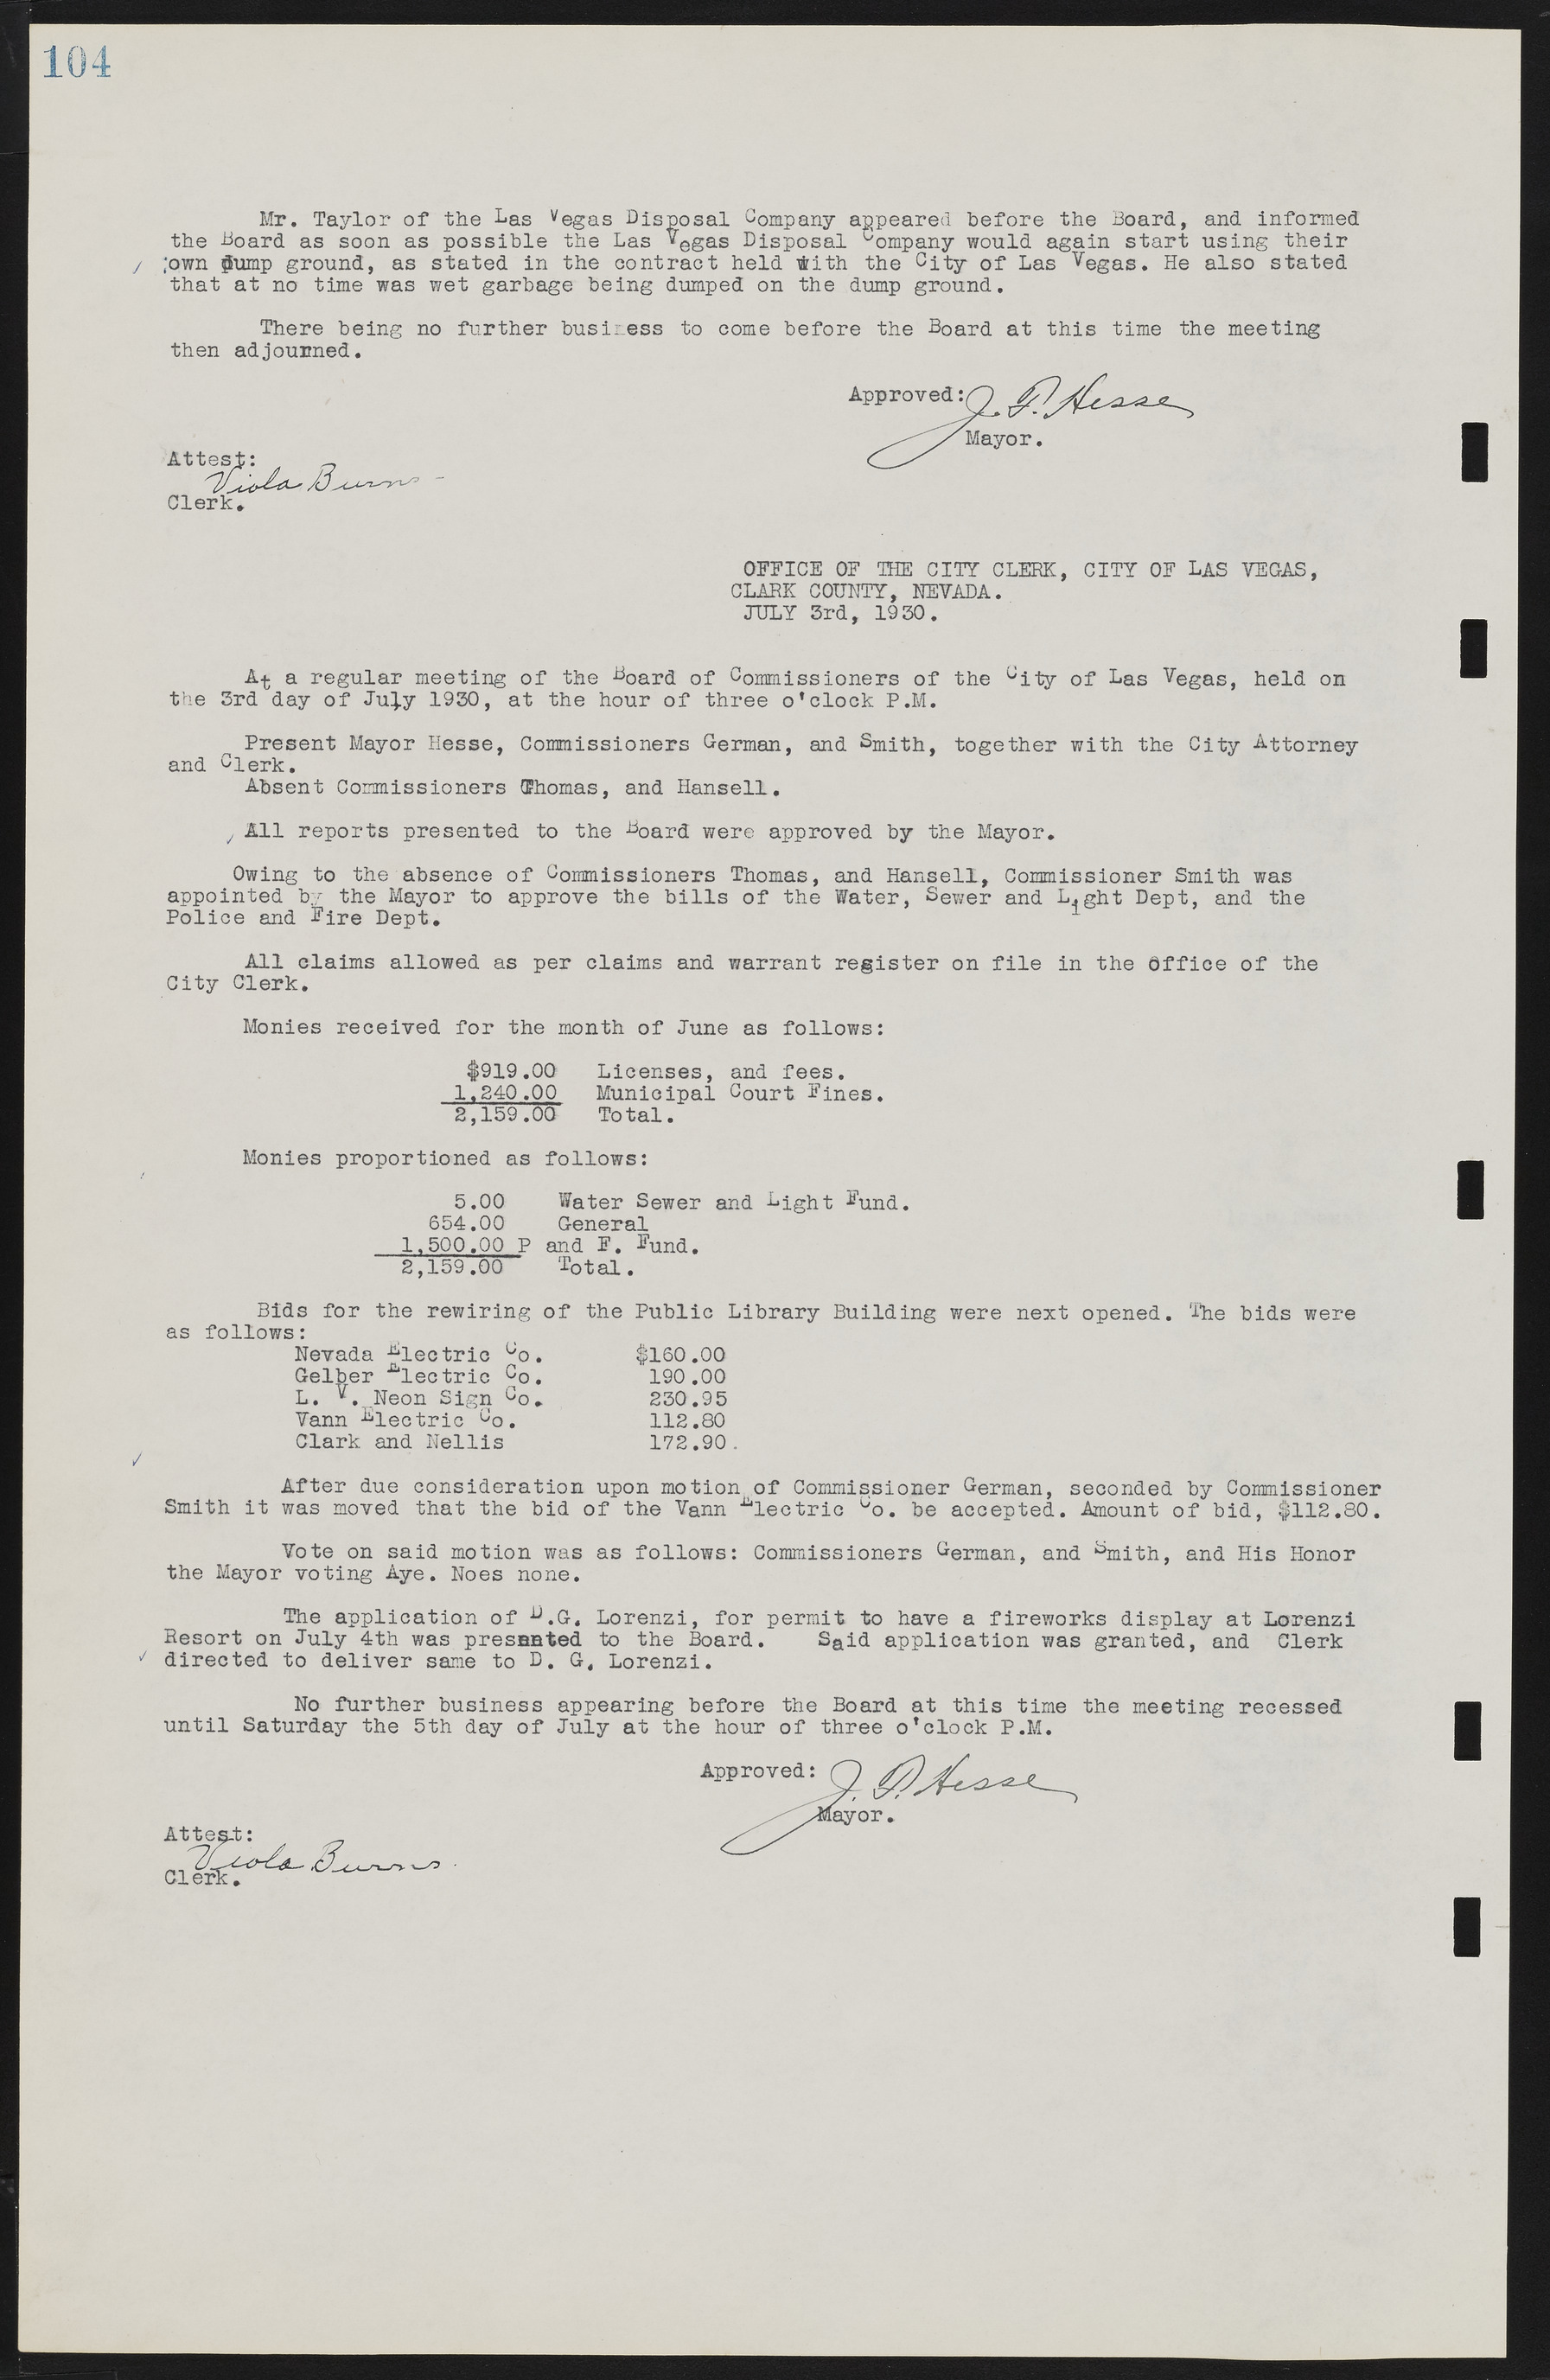 Las Vegas City Commission Minutes, May 14, 1929 to February 11, 1937, lvc000003-110